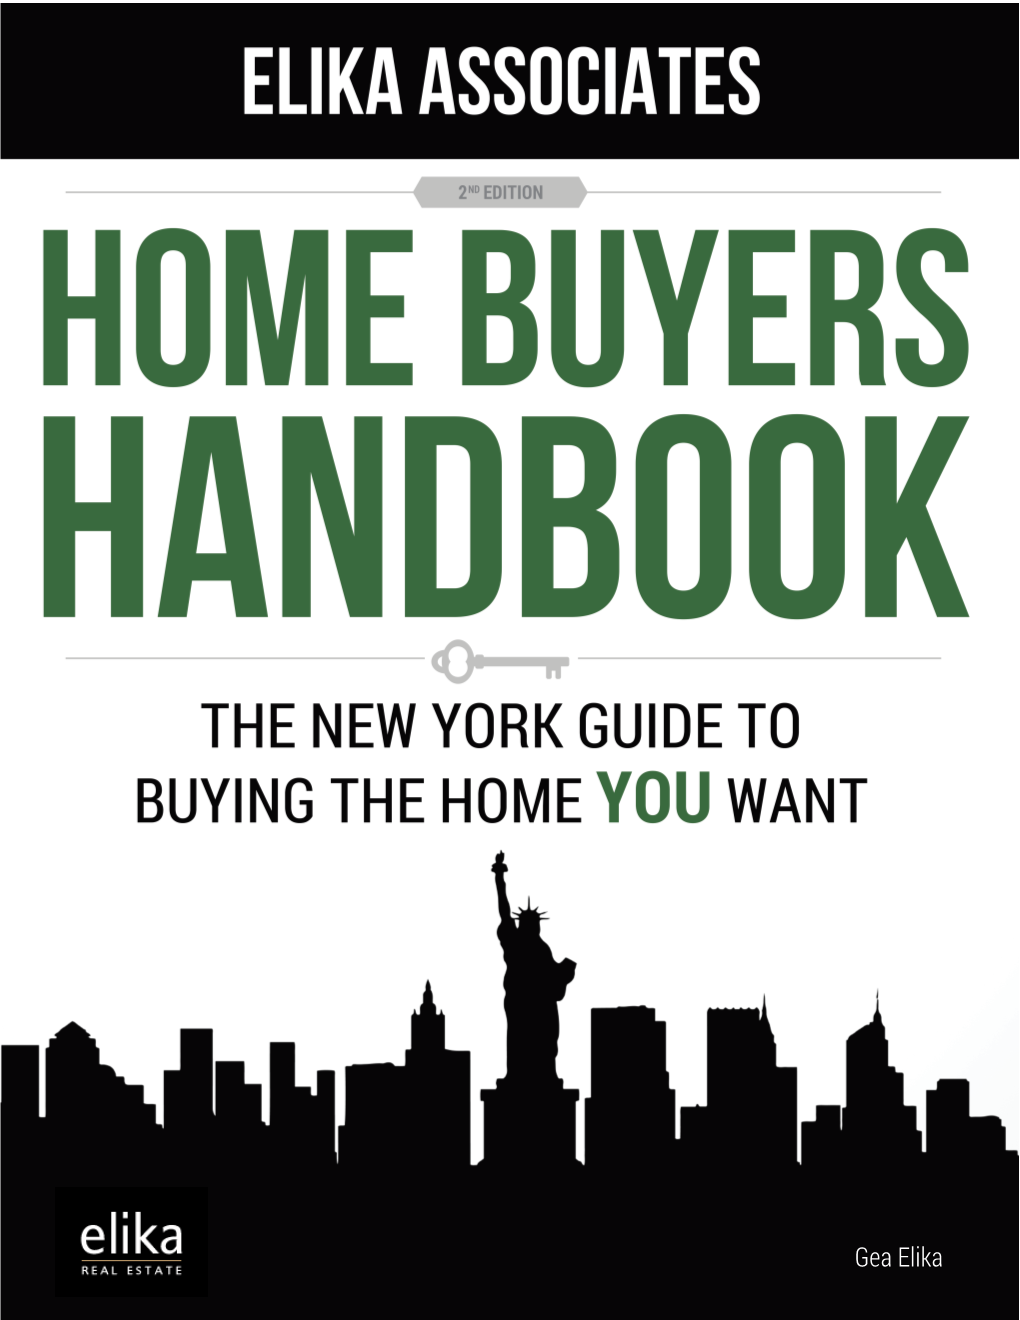 New York City First-Time Home Buyers Guide